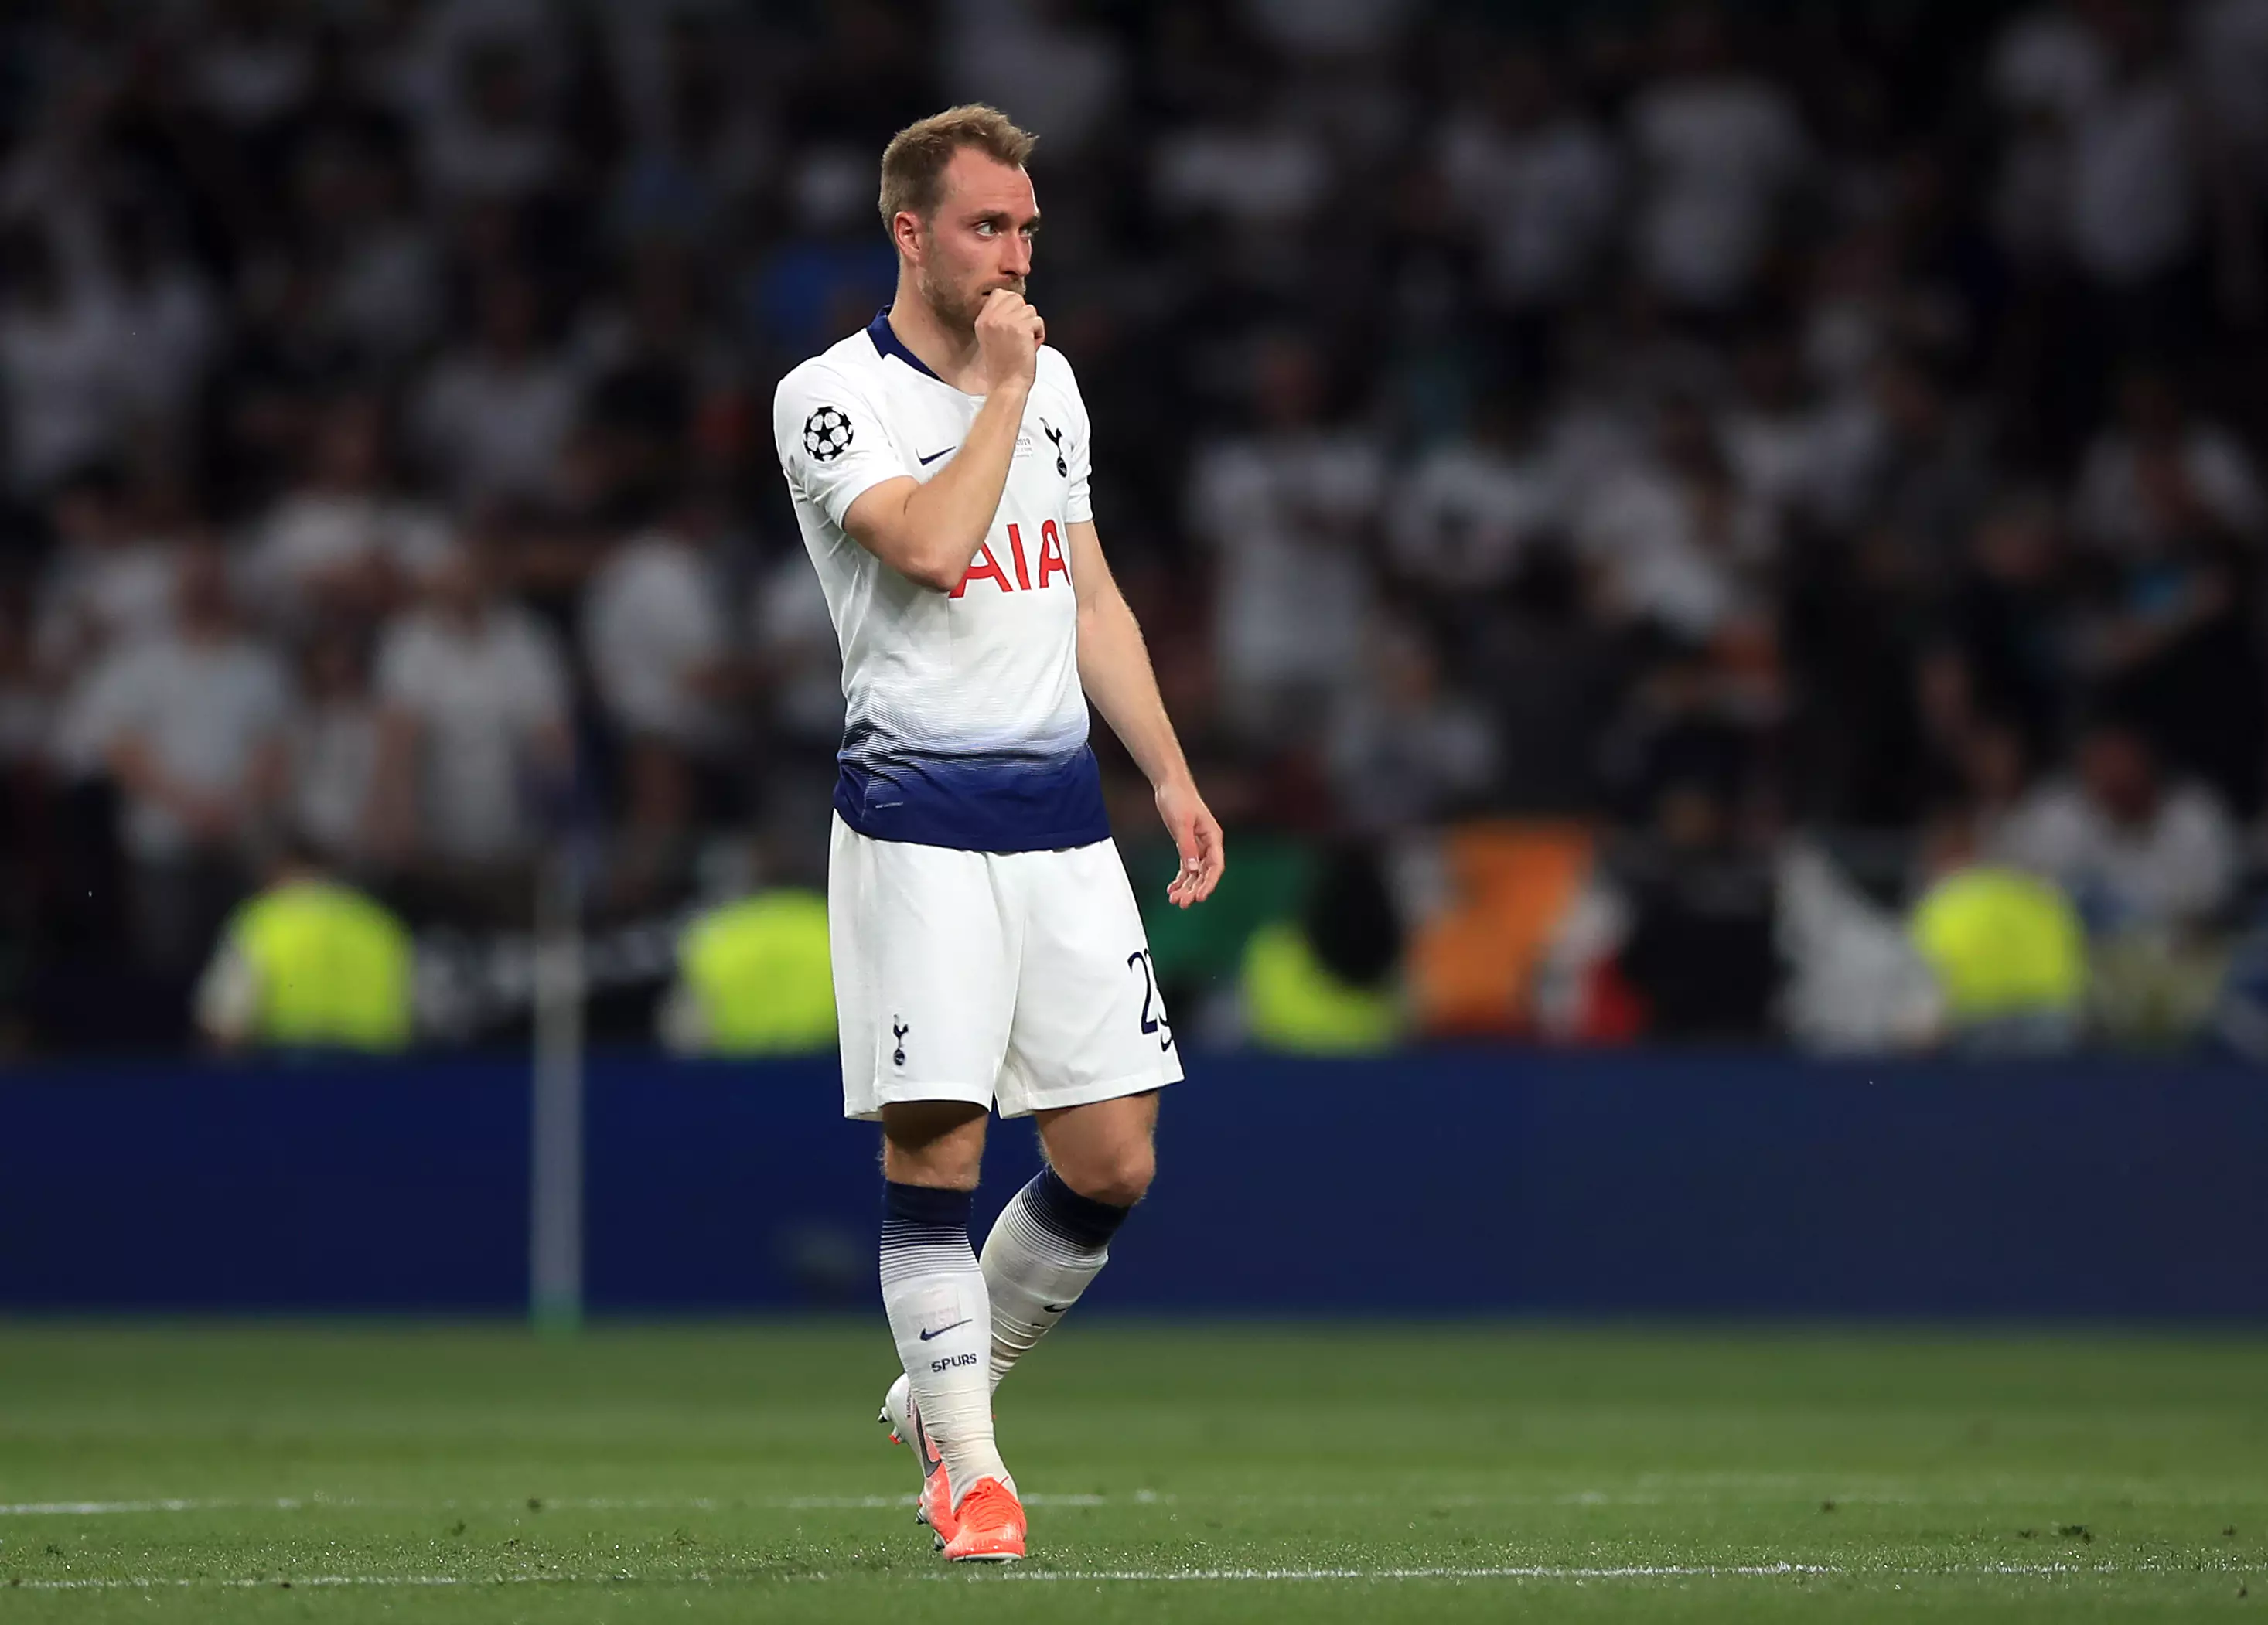 It hasn't taken long after disappointment in the final for Eriksen to reveal he wants to leave. Image: PA Images